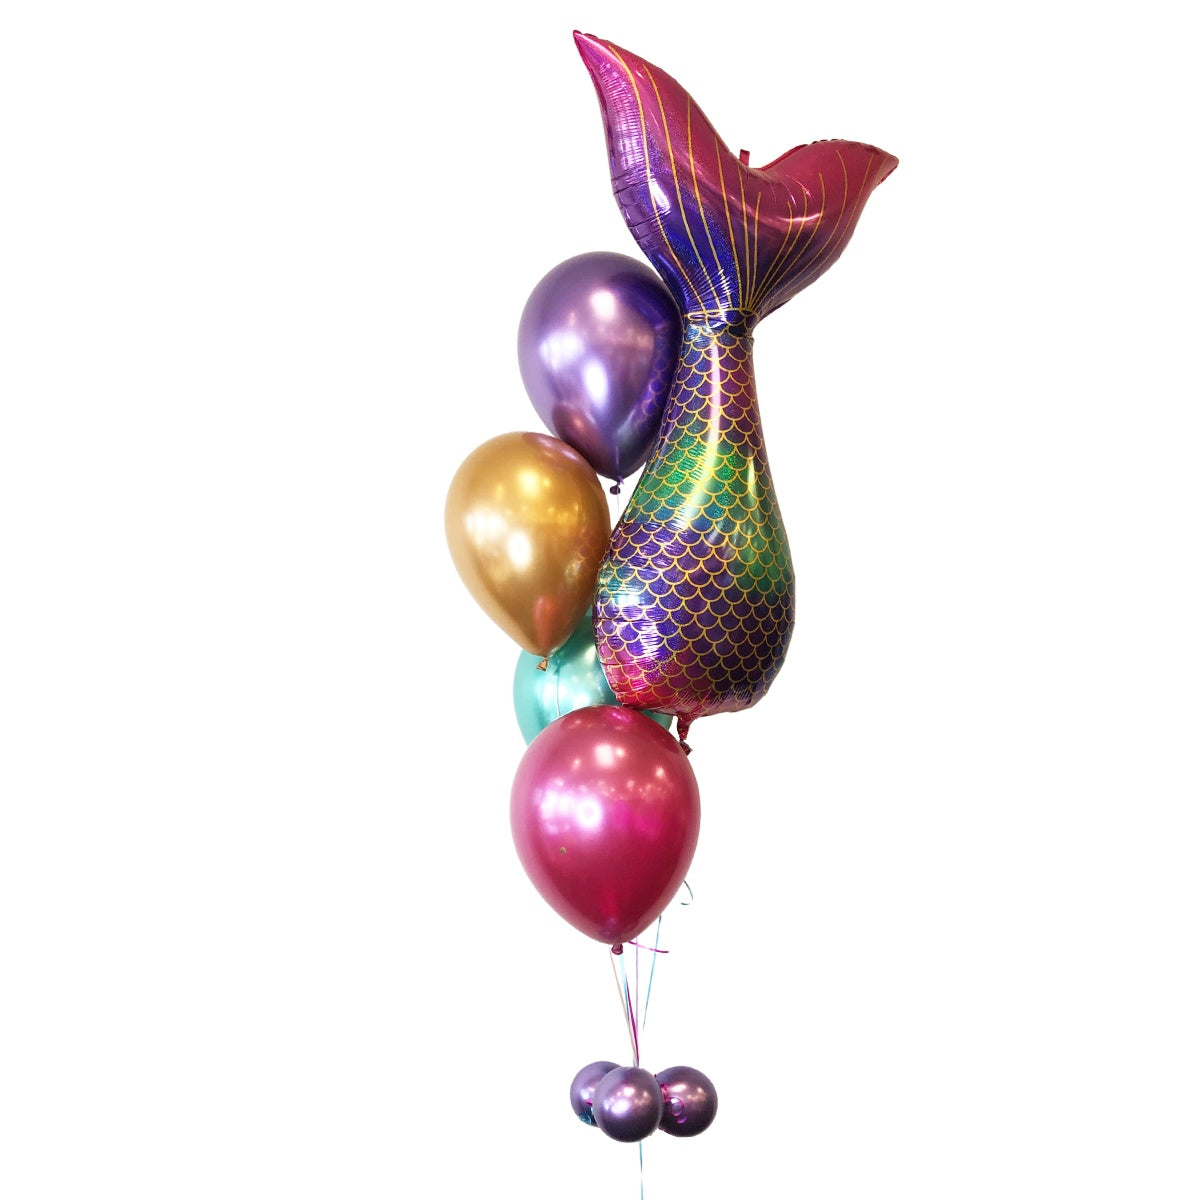 BOUQUET - MYLAR BALLOONS MERMAID TAIL AND CHROME BALLOONS 